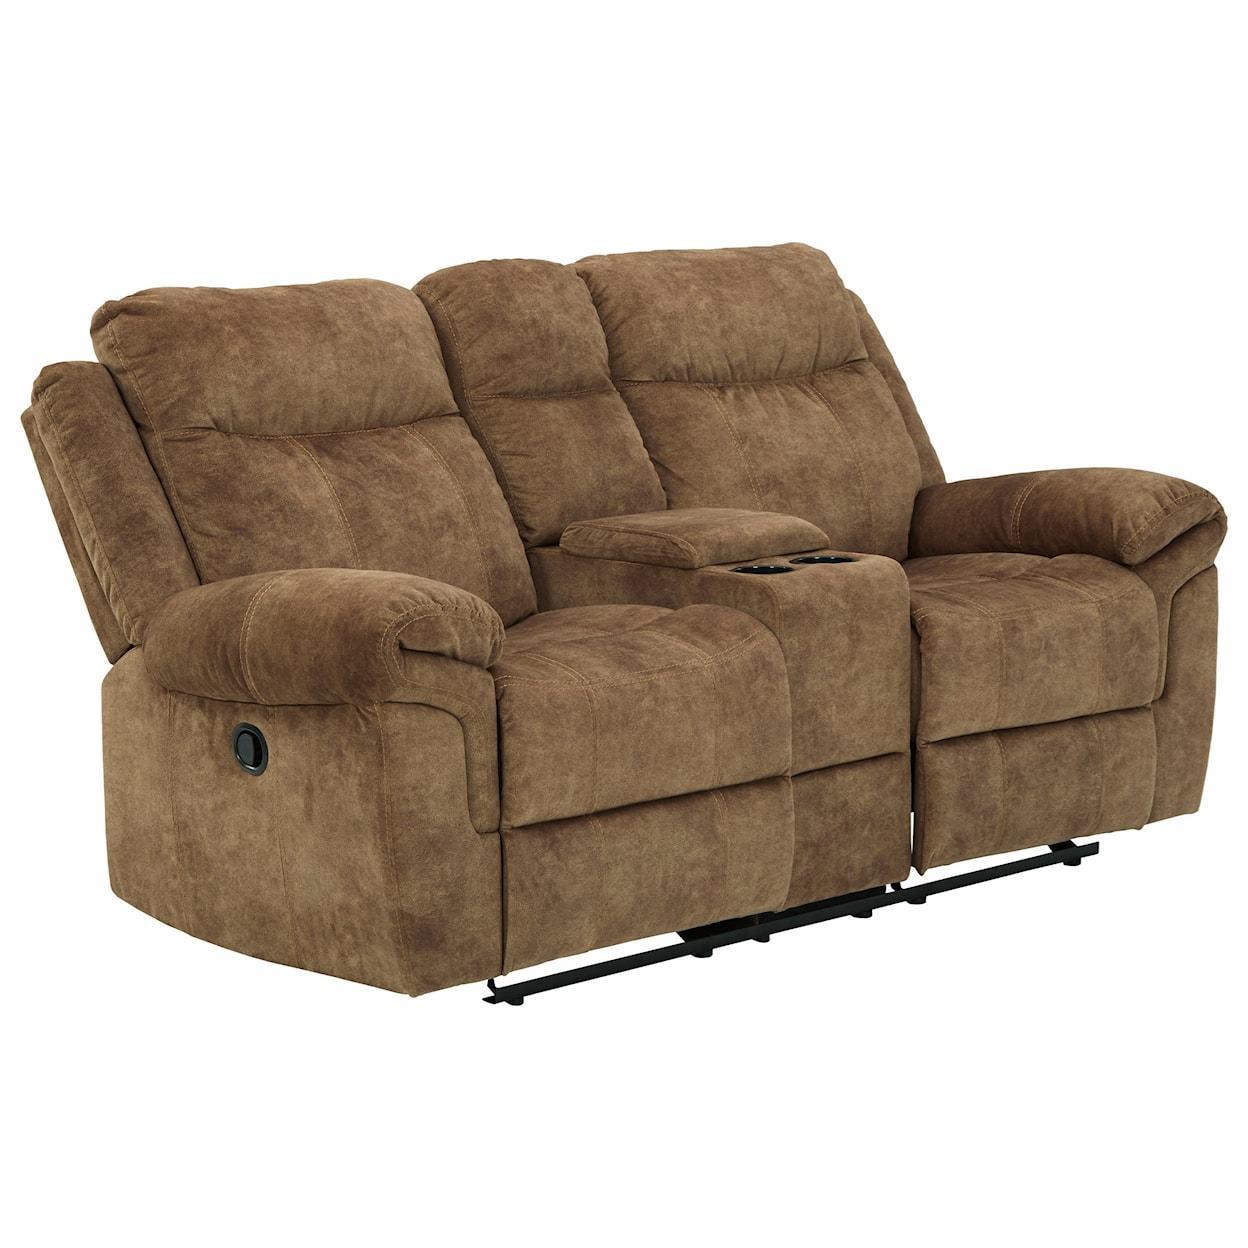 Signature Design by Ashley Huddle-Up Double Reclining Loveseat w/ Console